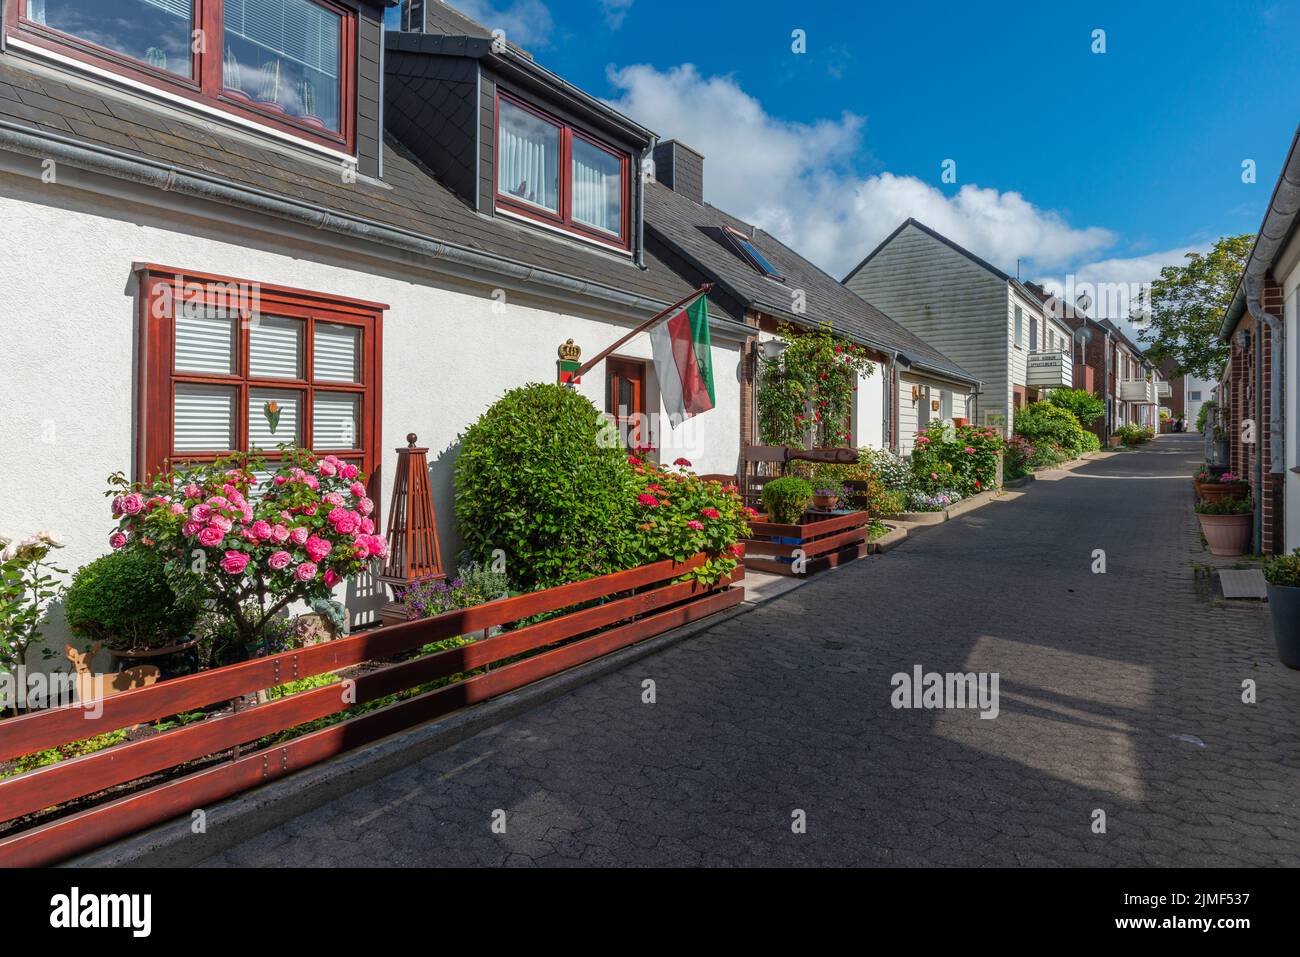 Typical architecture with earthen colors andasymmetric gables in Upper Land of North Sea island Heligoland, Schleswig-Holstein, Northern Germany Stock Photo